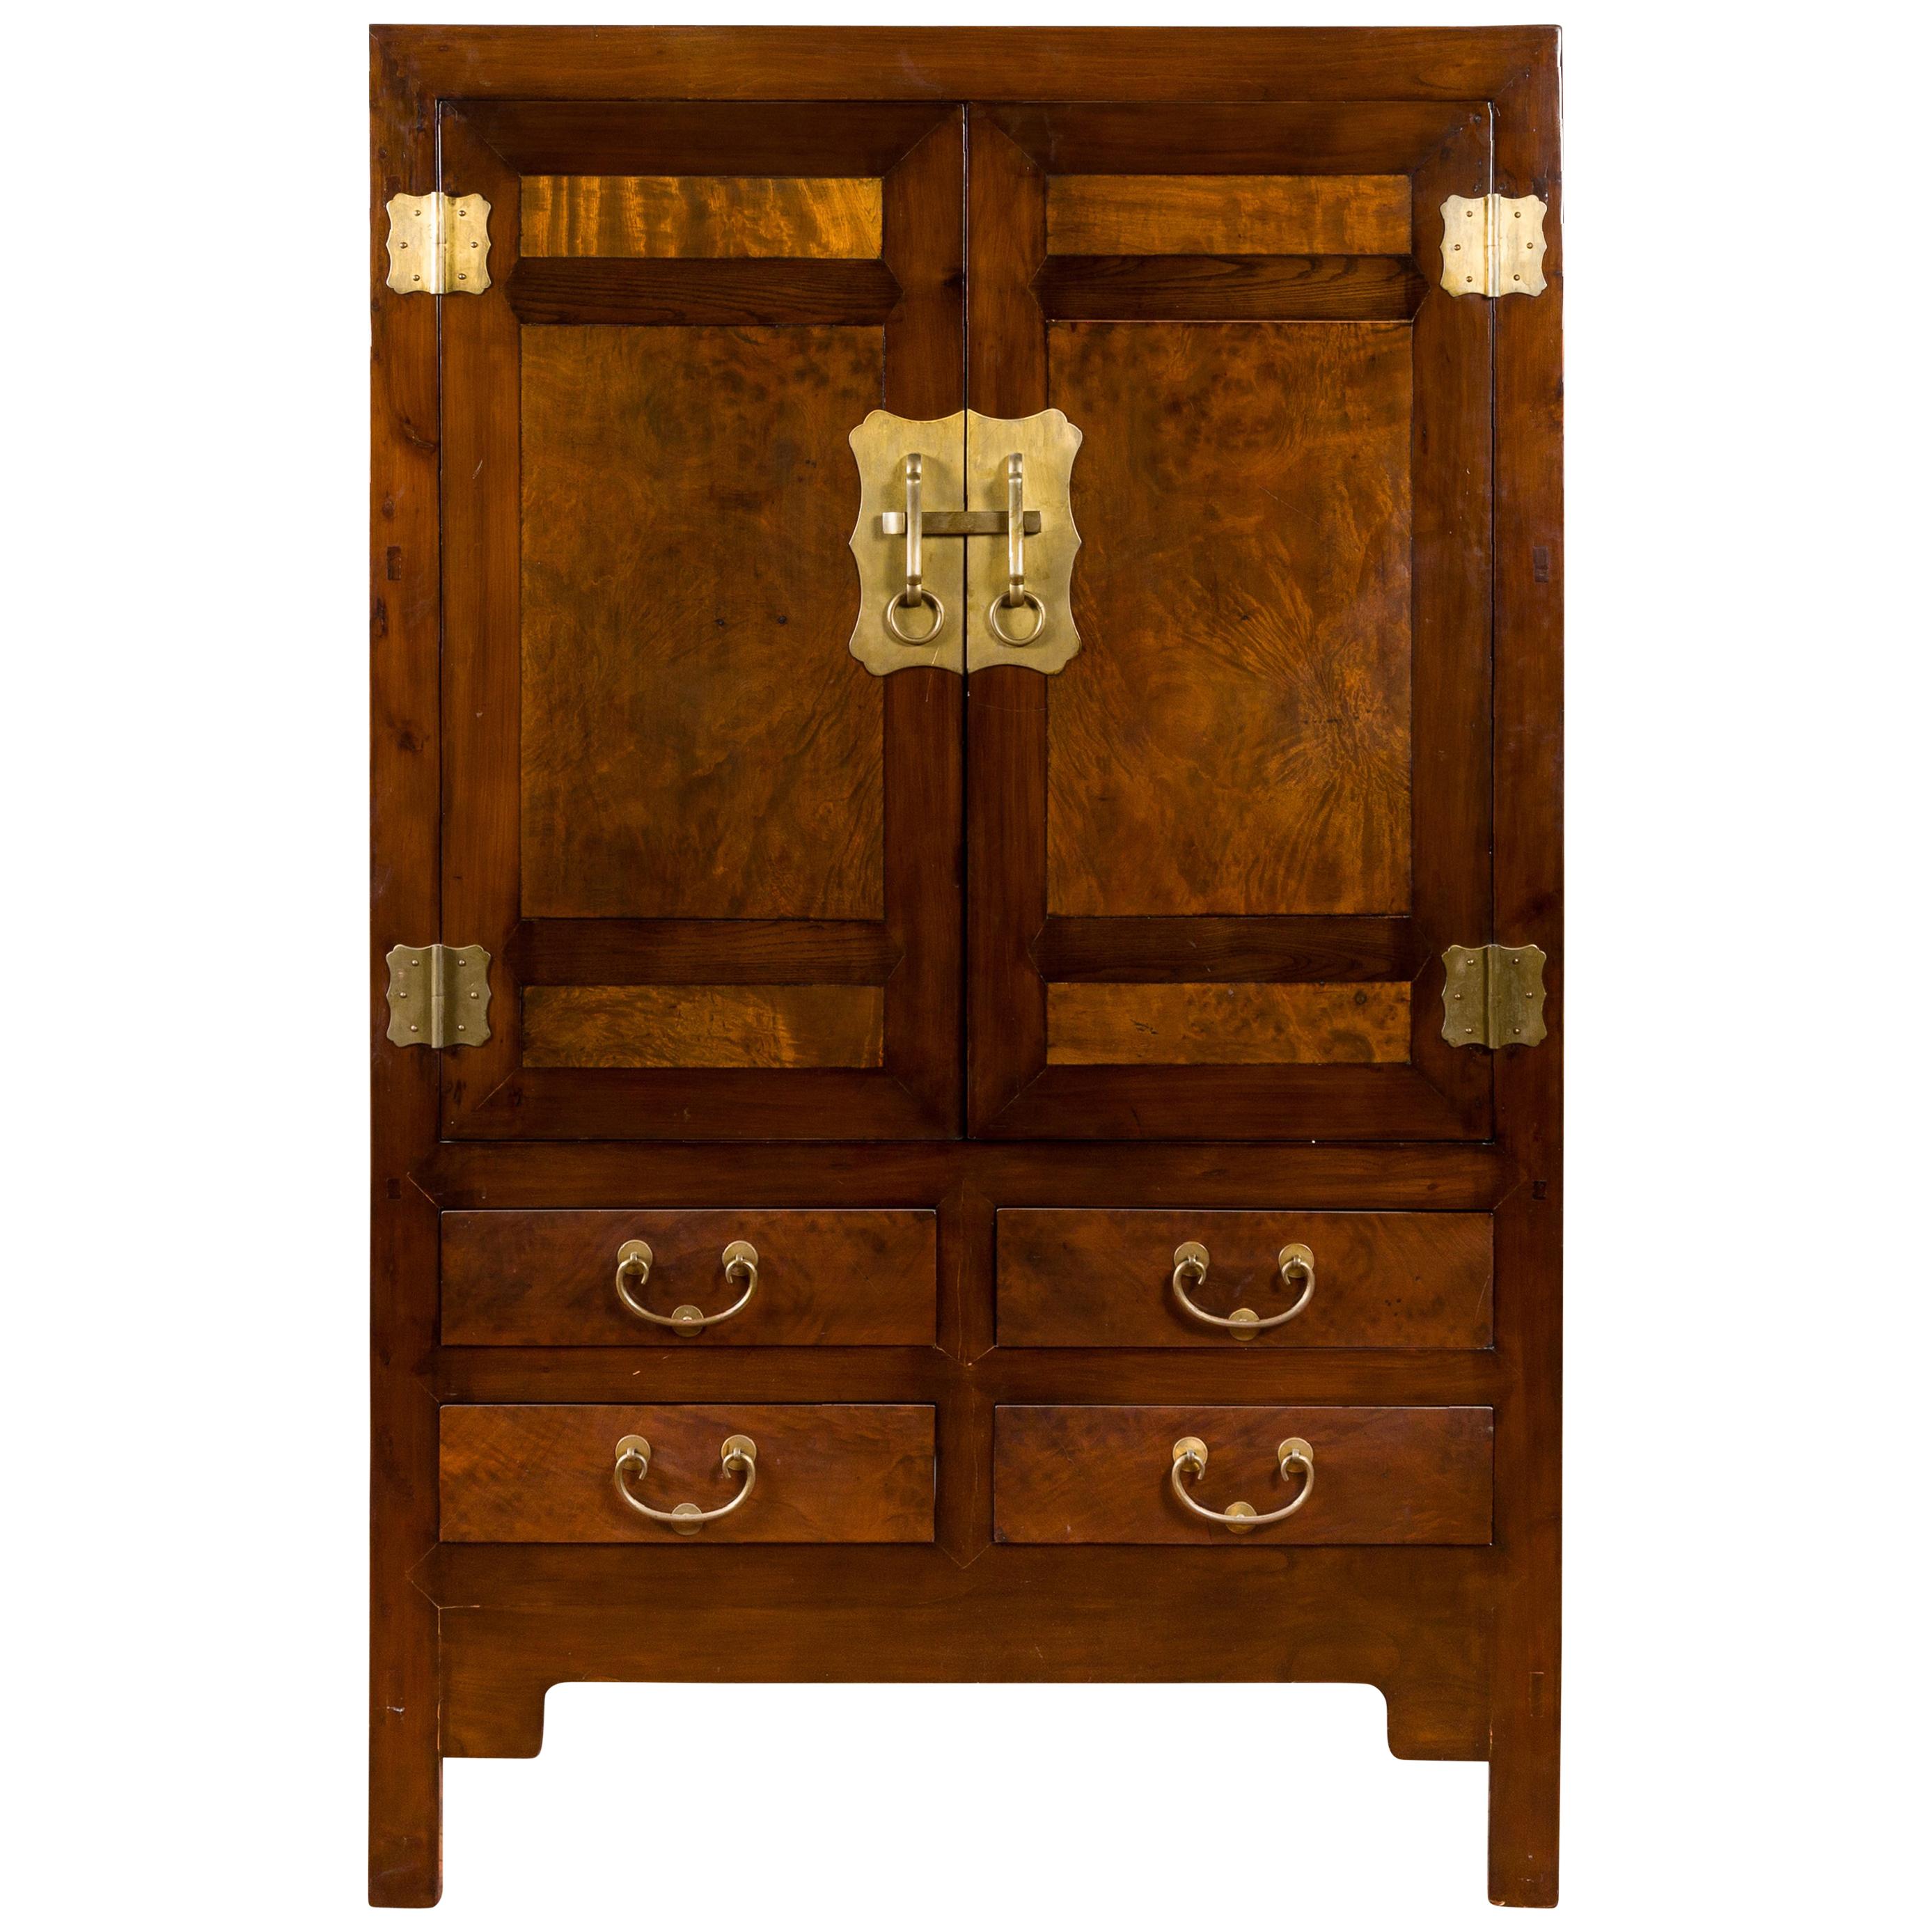 Chinese 1920s-1930s Elm and Burl Cabinet with Doors, Drawers and Brass Hardware